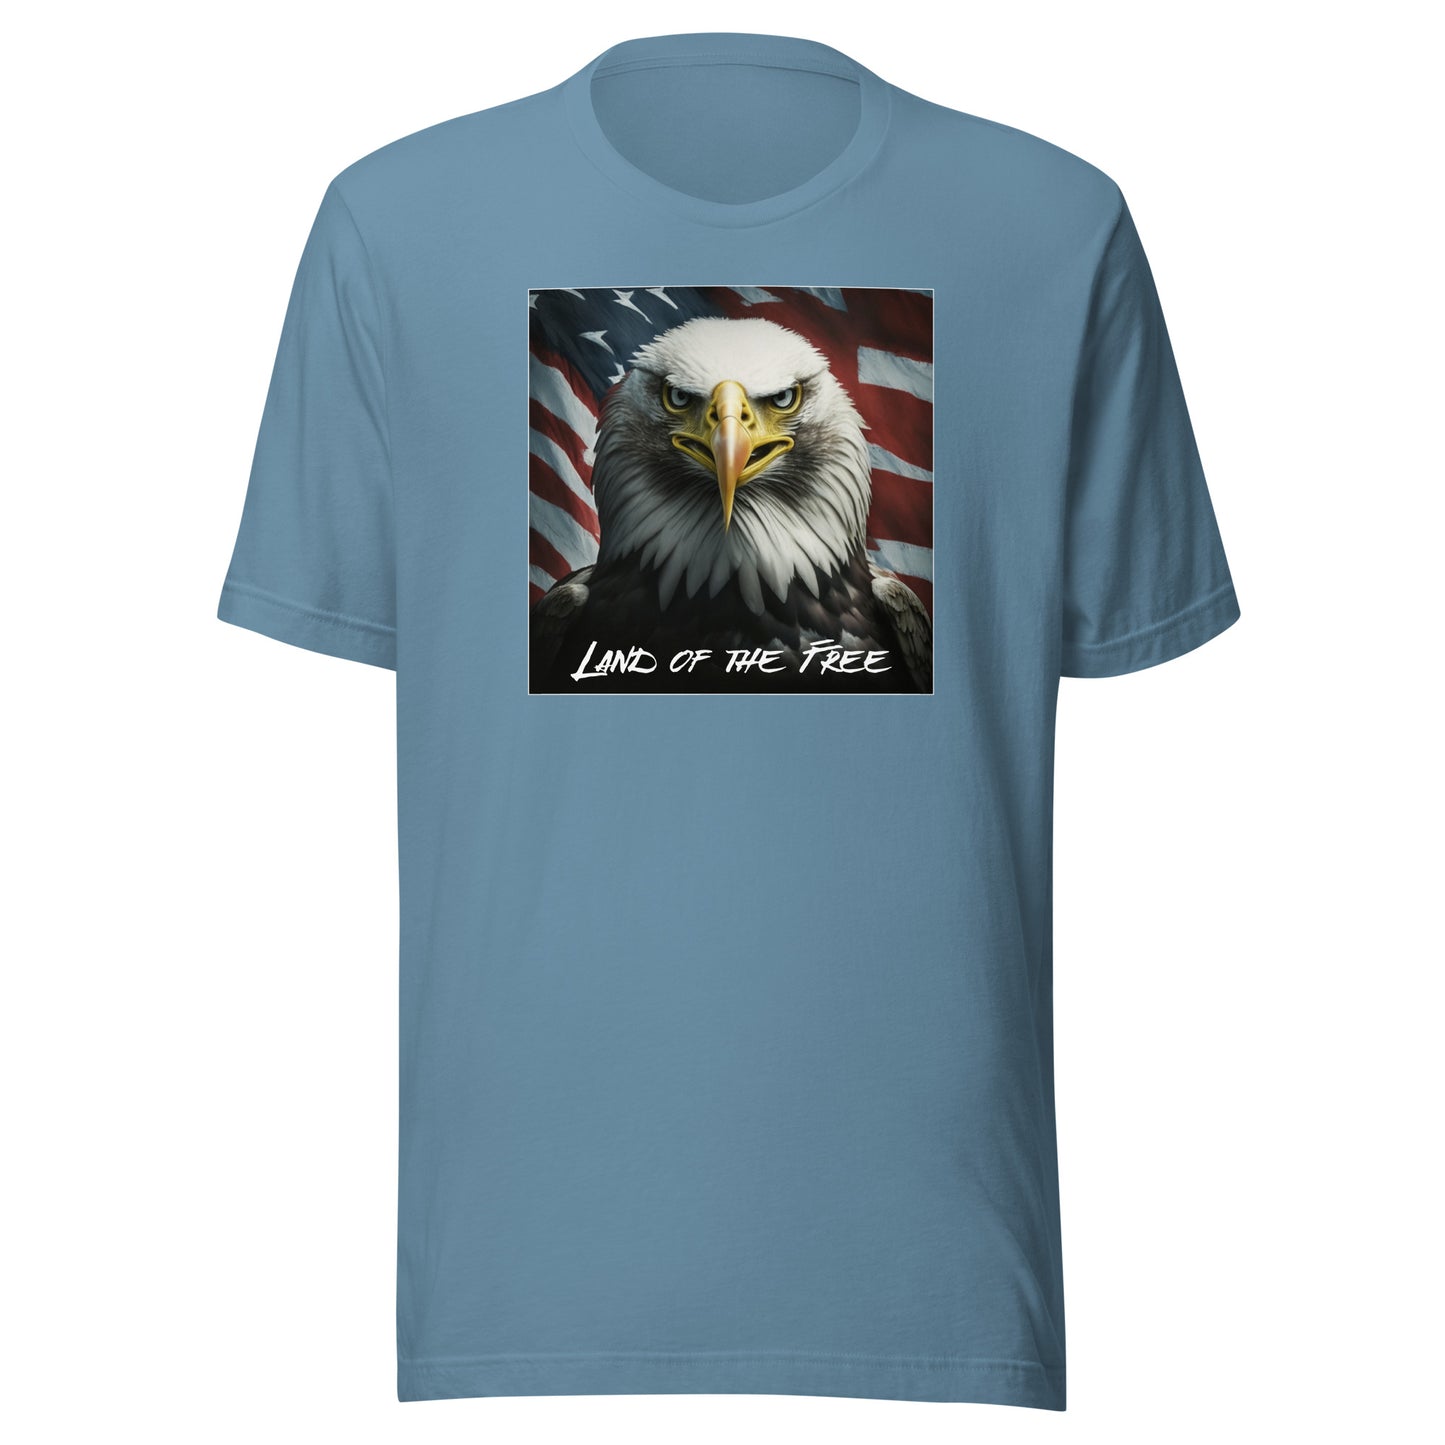 Land of the Free Graphic T-Shirt Steel Blue